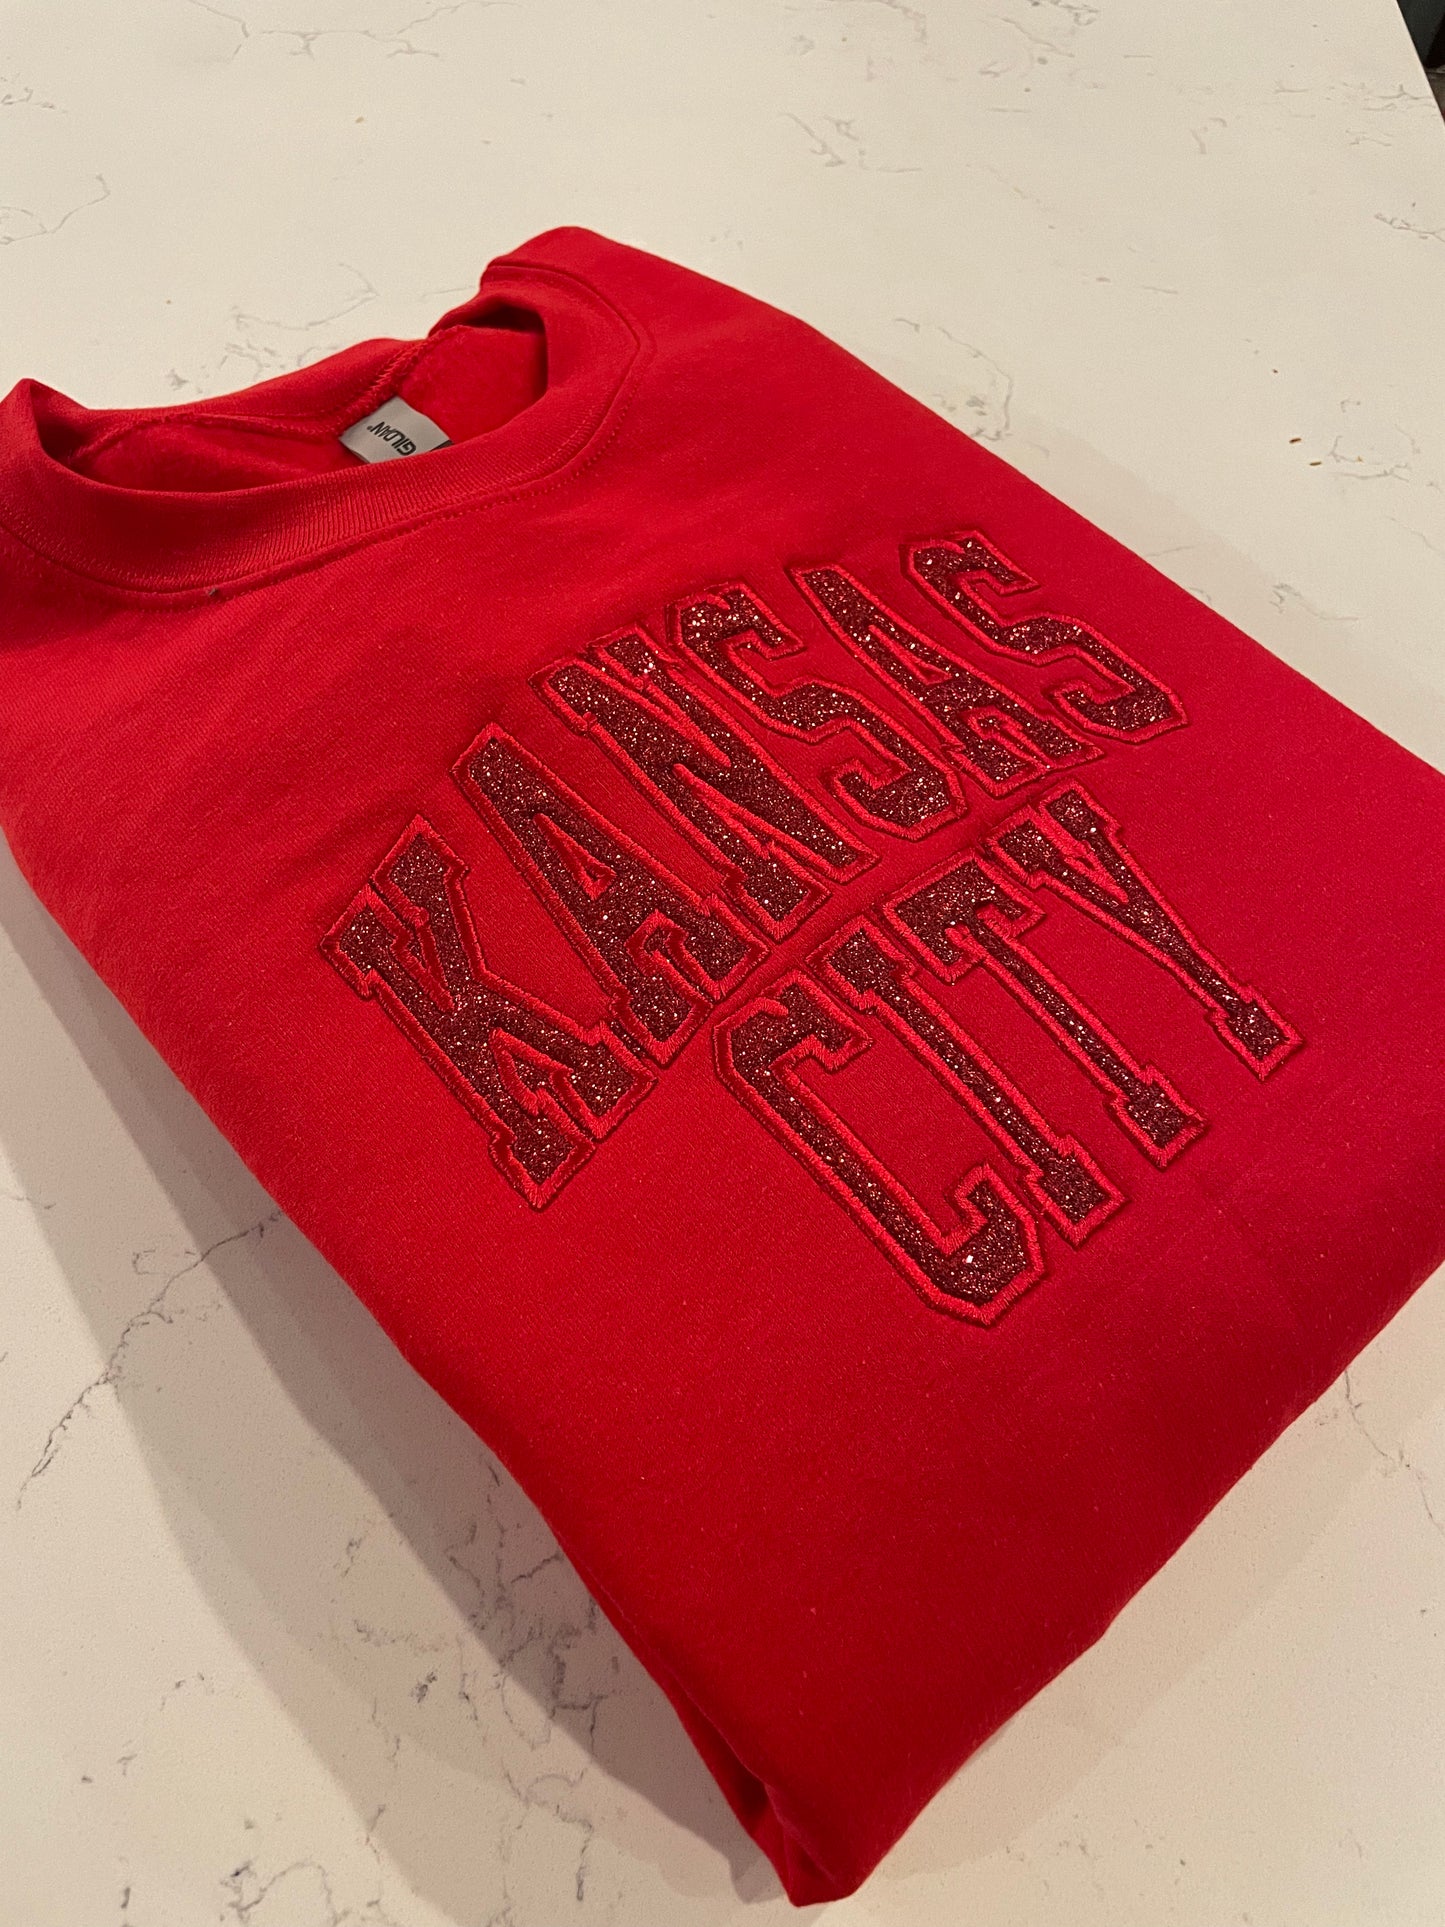 Kansas City Glitter Block - Red Monotone -  REAL Glitter with Embroidery finish